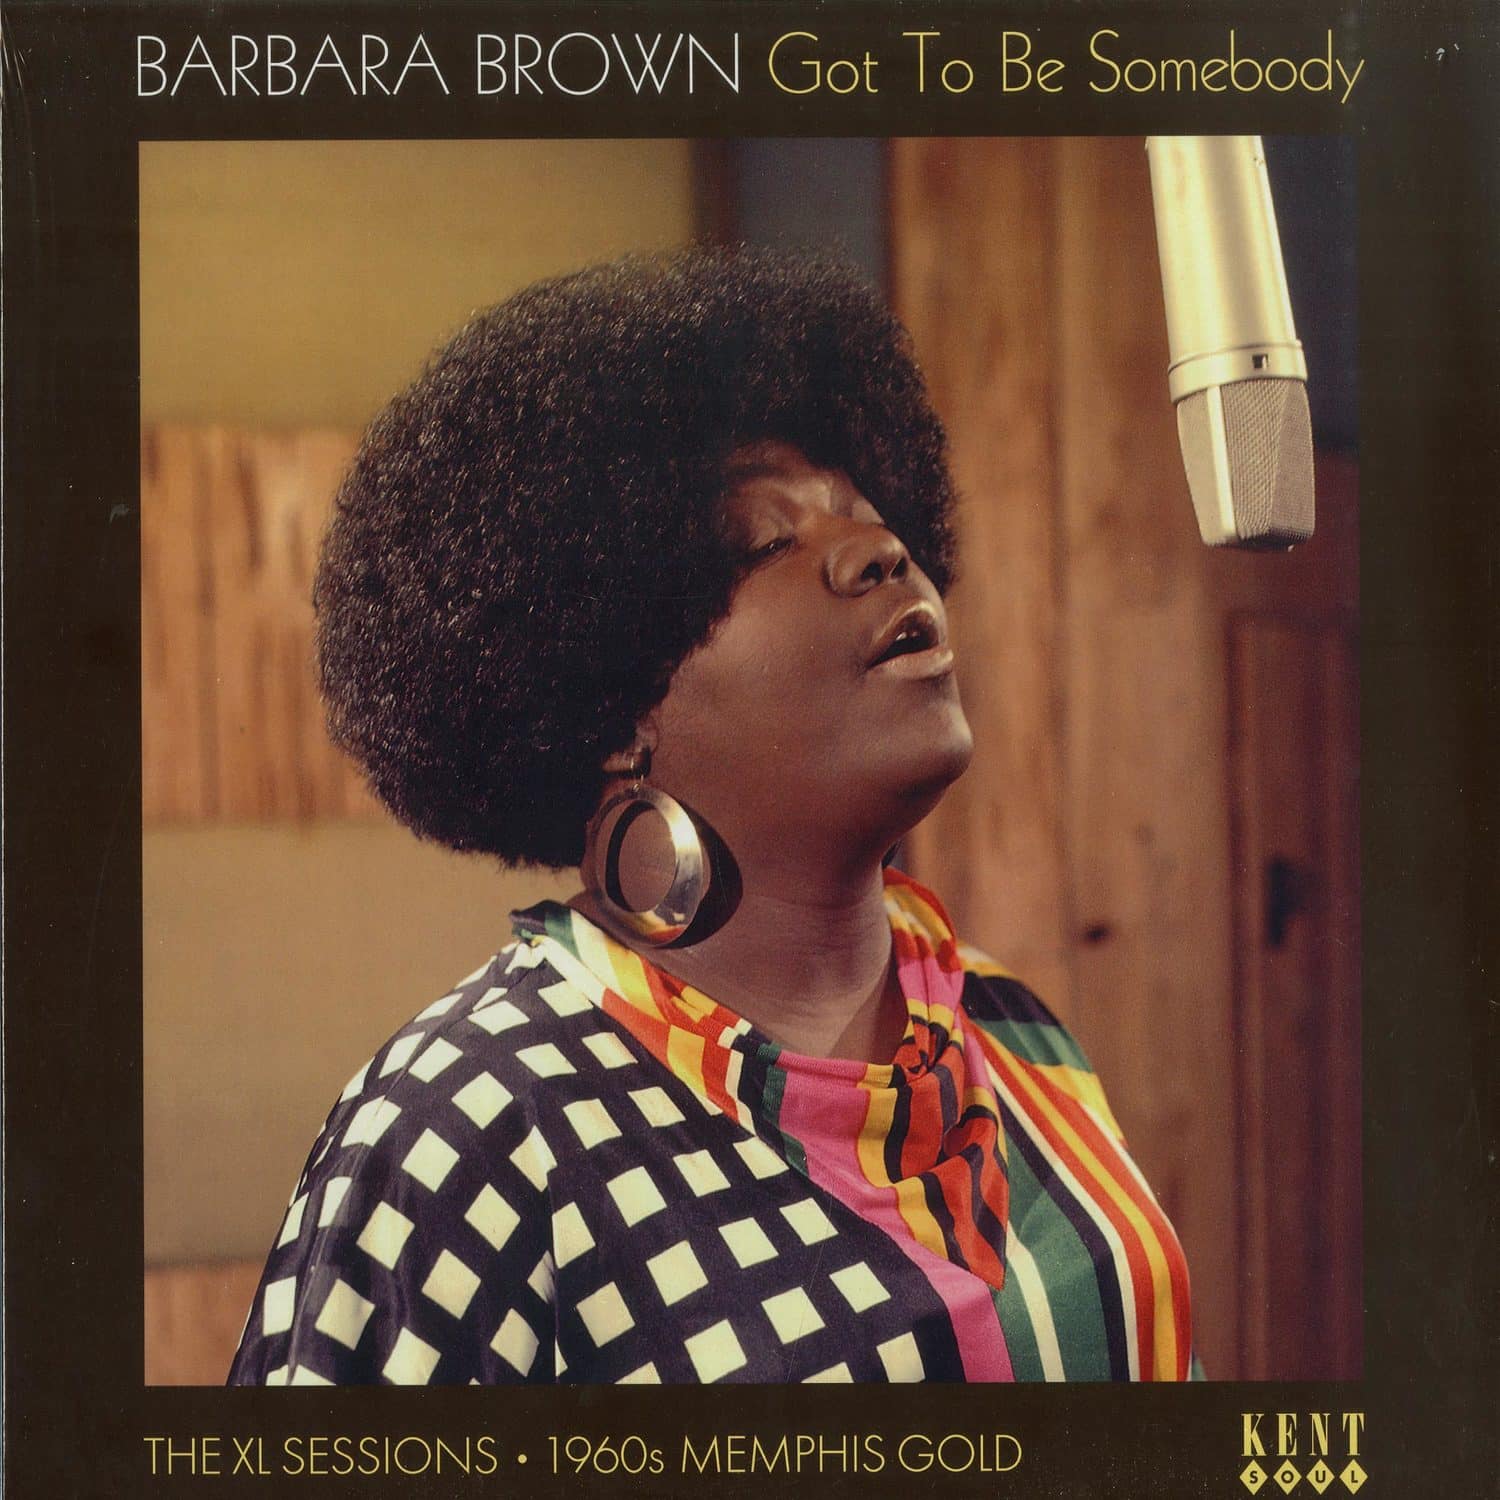 Barbara Brown - GOT TO BE SOMEBODY - THE XL SESSIONS 